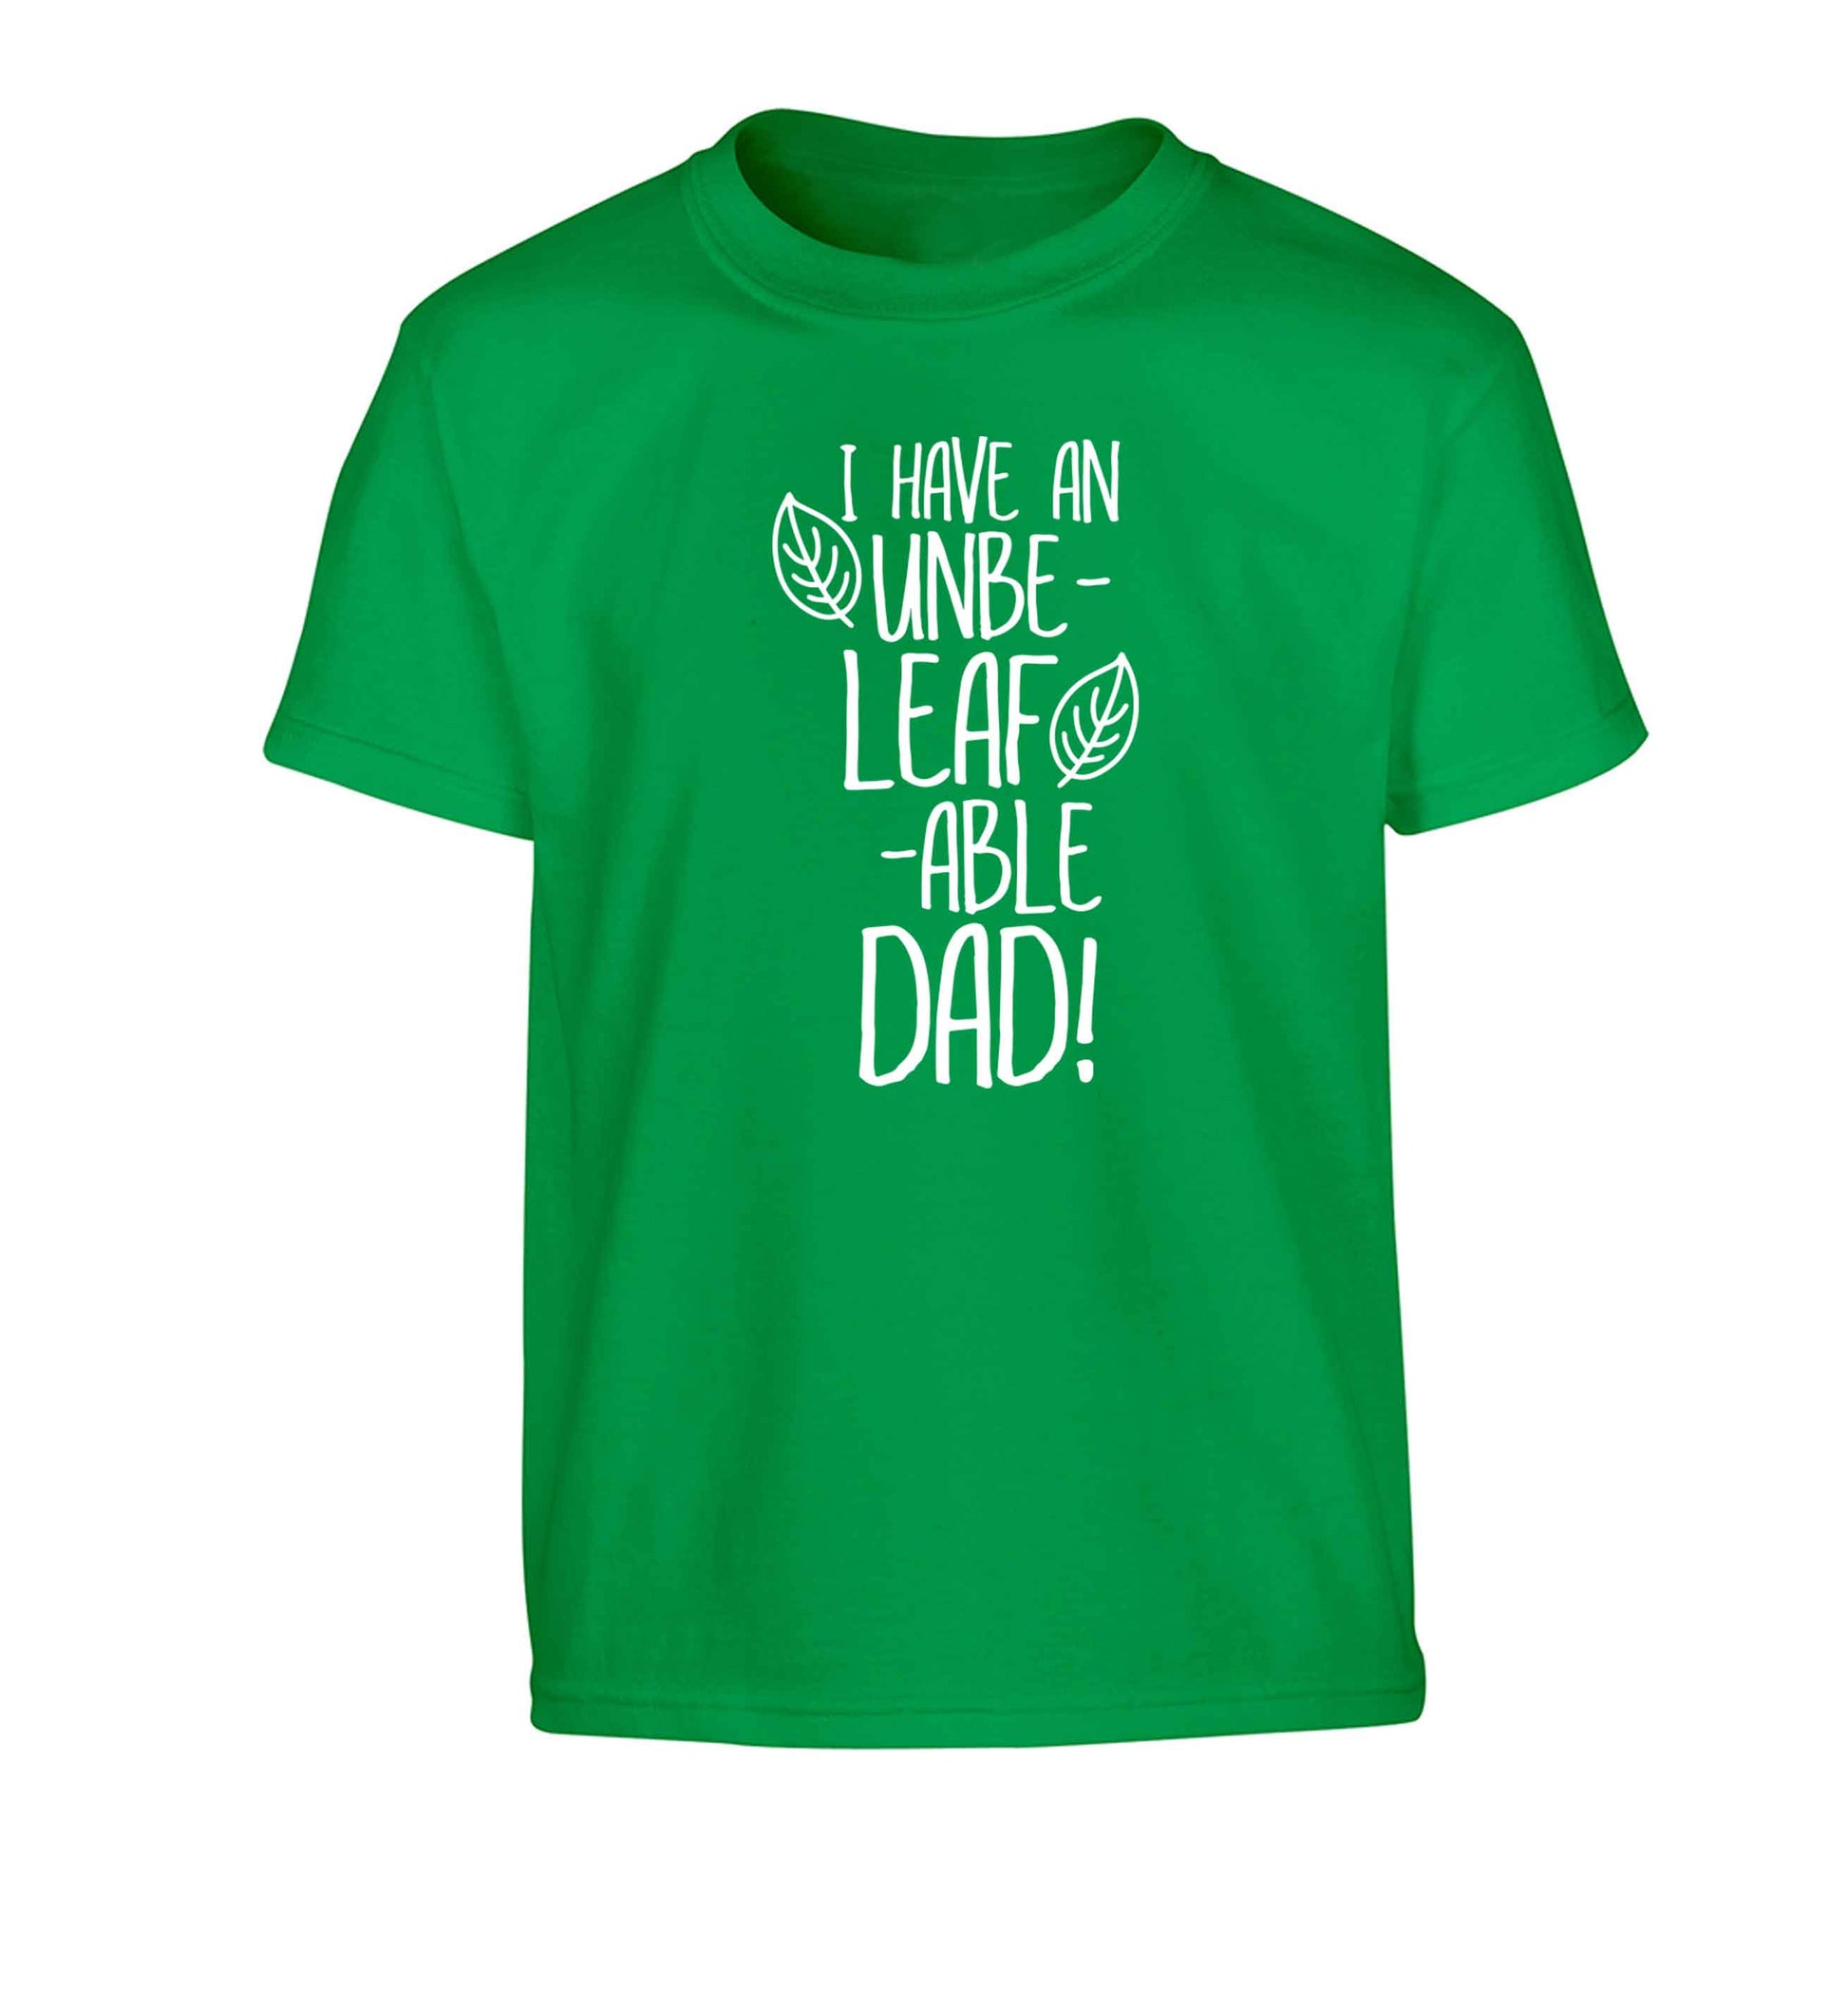 I have an unbe-leaf-able dad Children's green Tshirt 12-13 Years